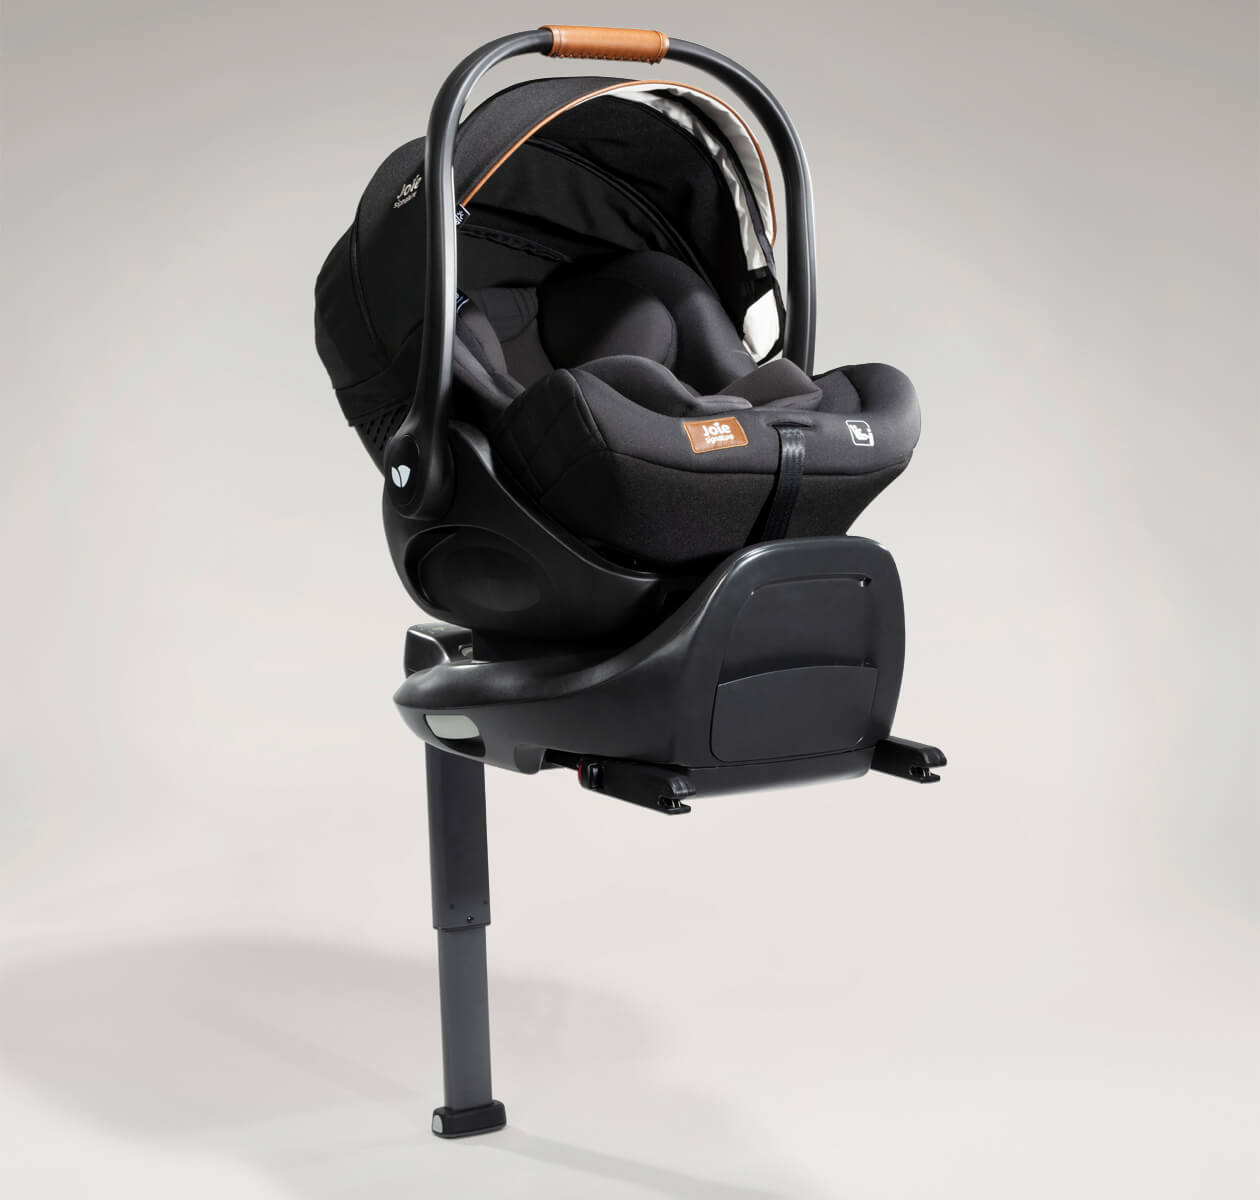  I level recline in eclipse black facing a right angle on the I base encore.